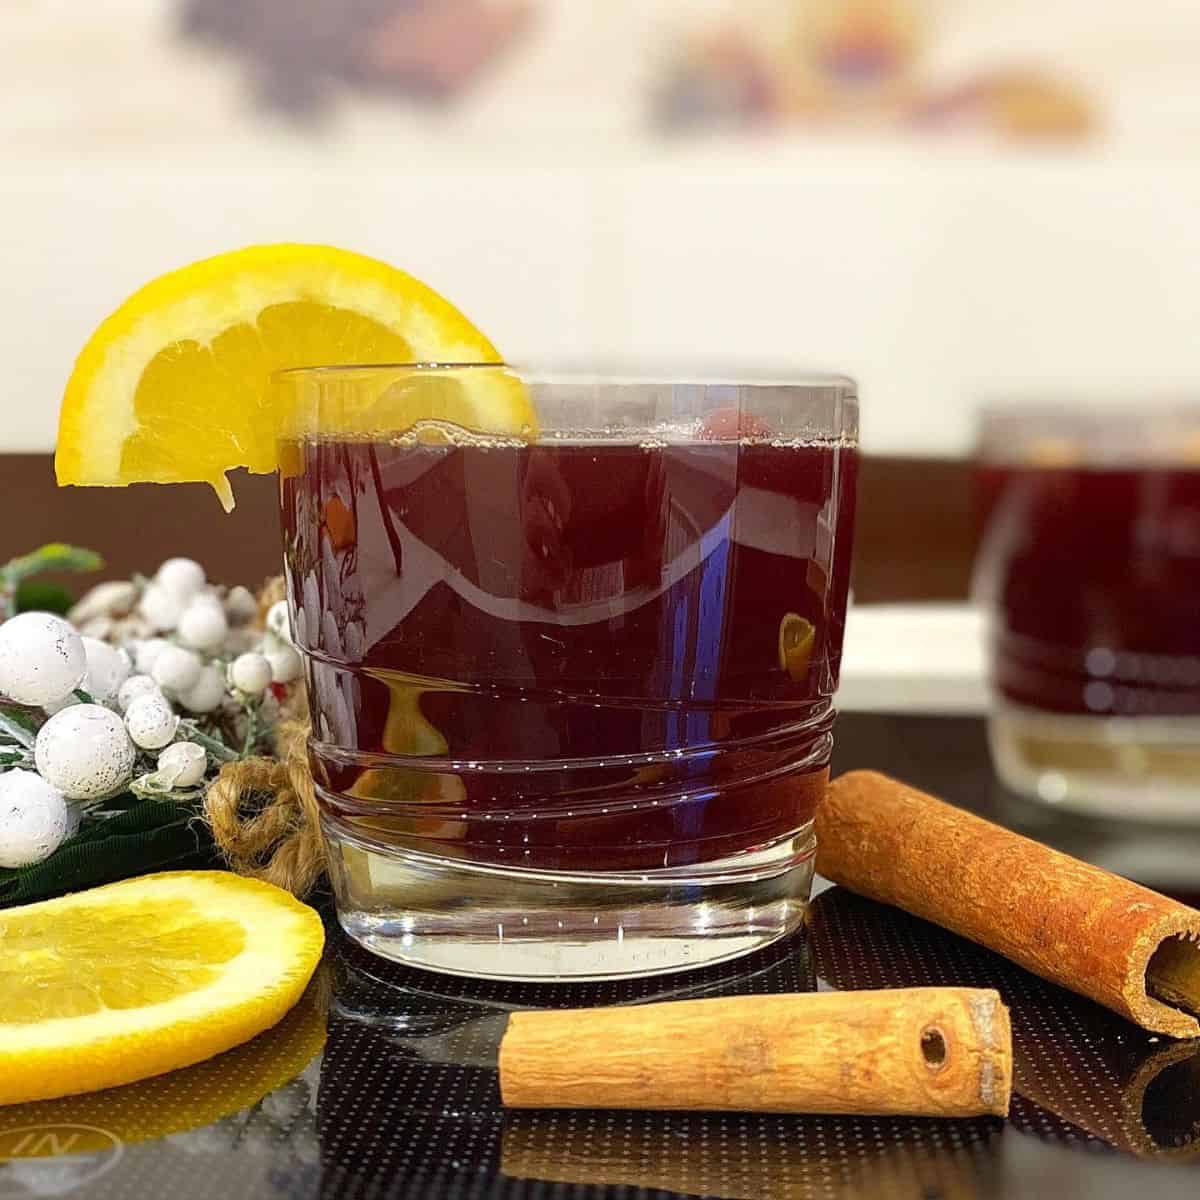 Non-alcoholic mulled wine in a small cup with lemon on side and cinnamon stick